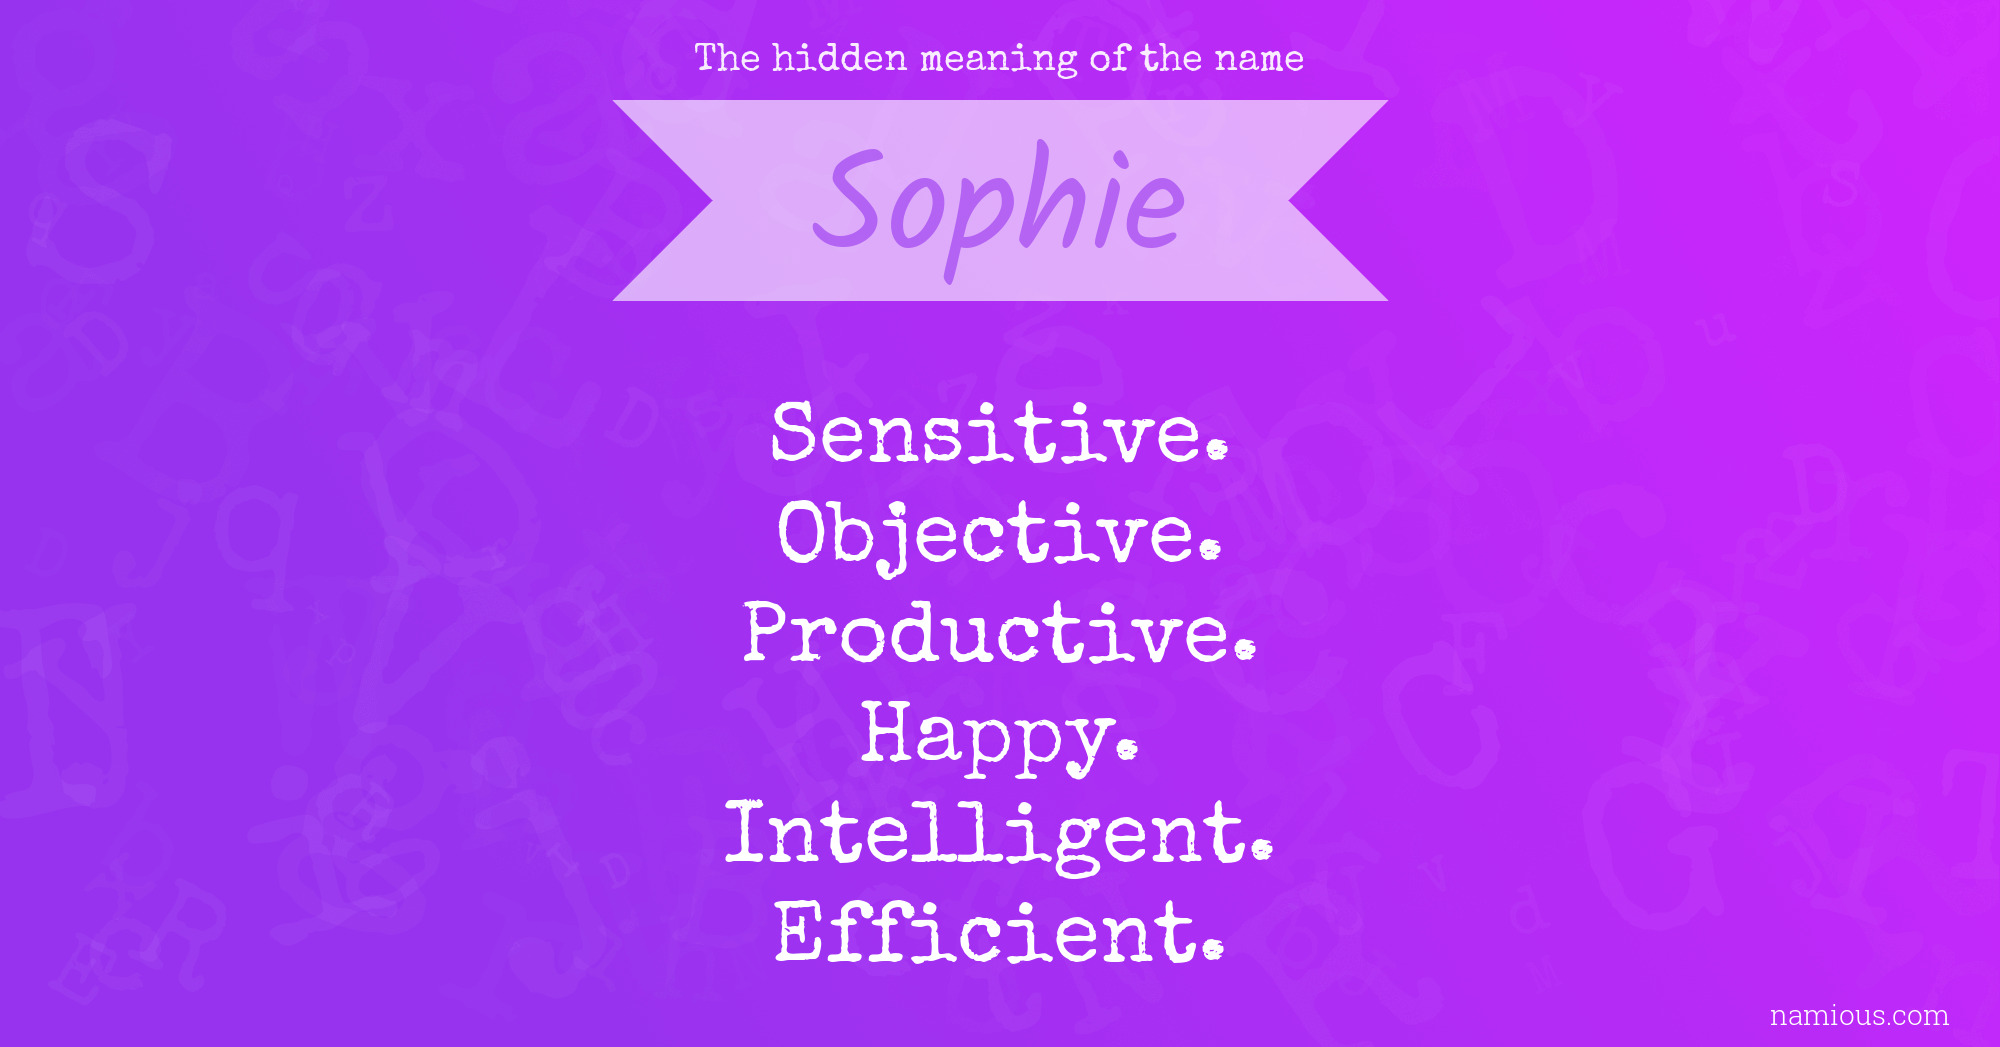 The hidden meaning of the name Sophie | Namious